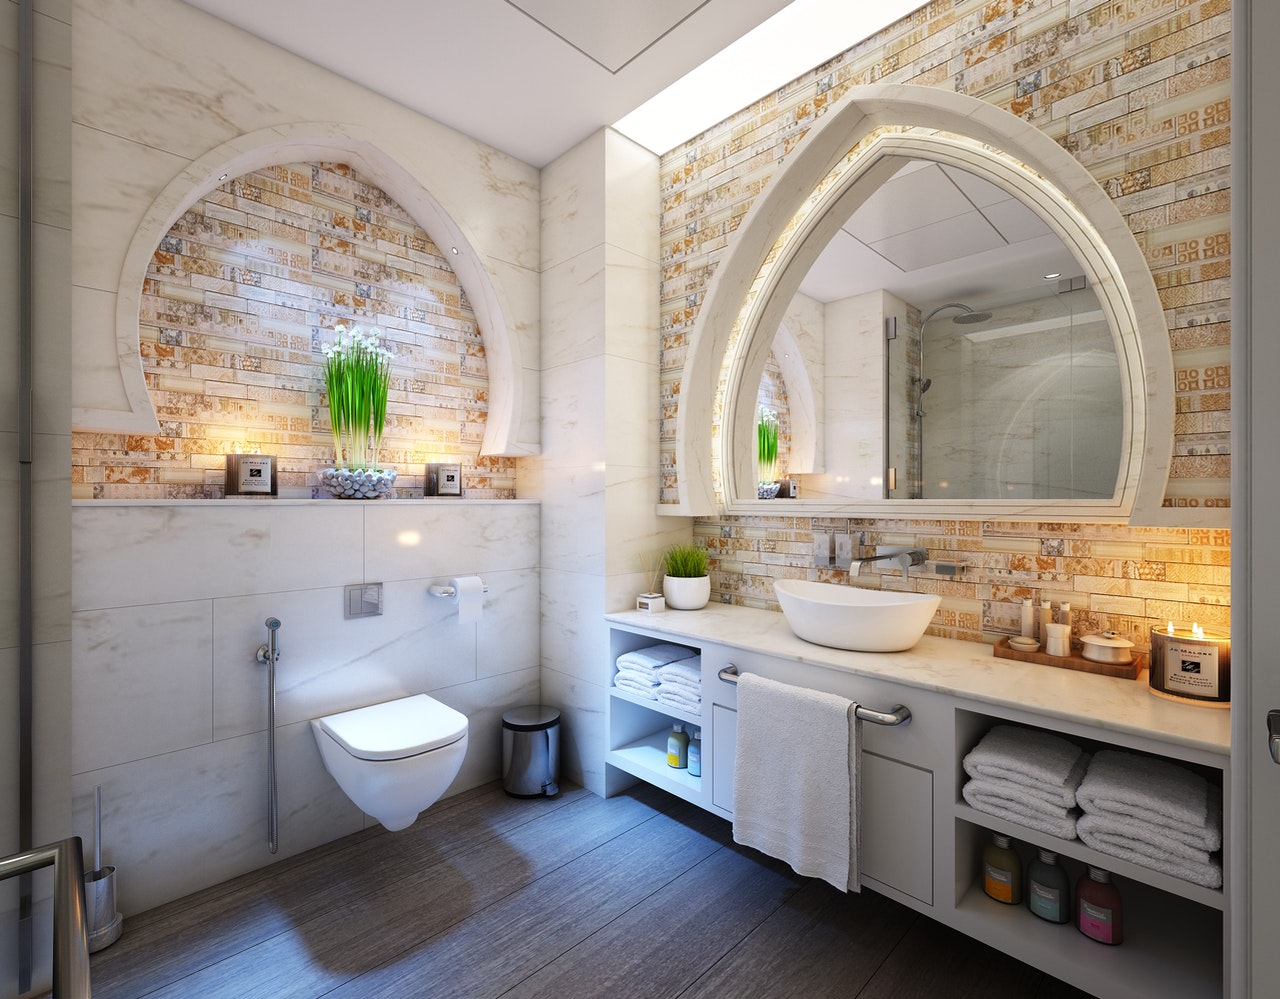 The Benefits of Renovating Your Bathroom